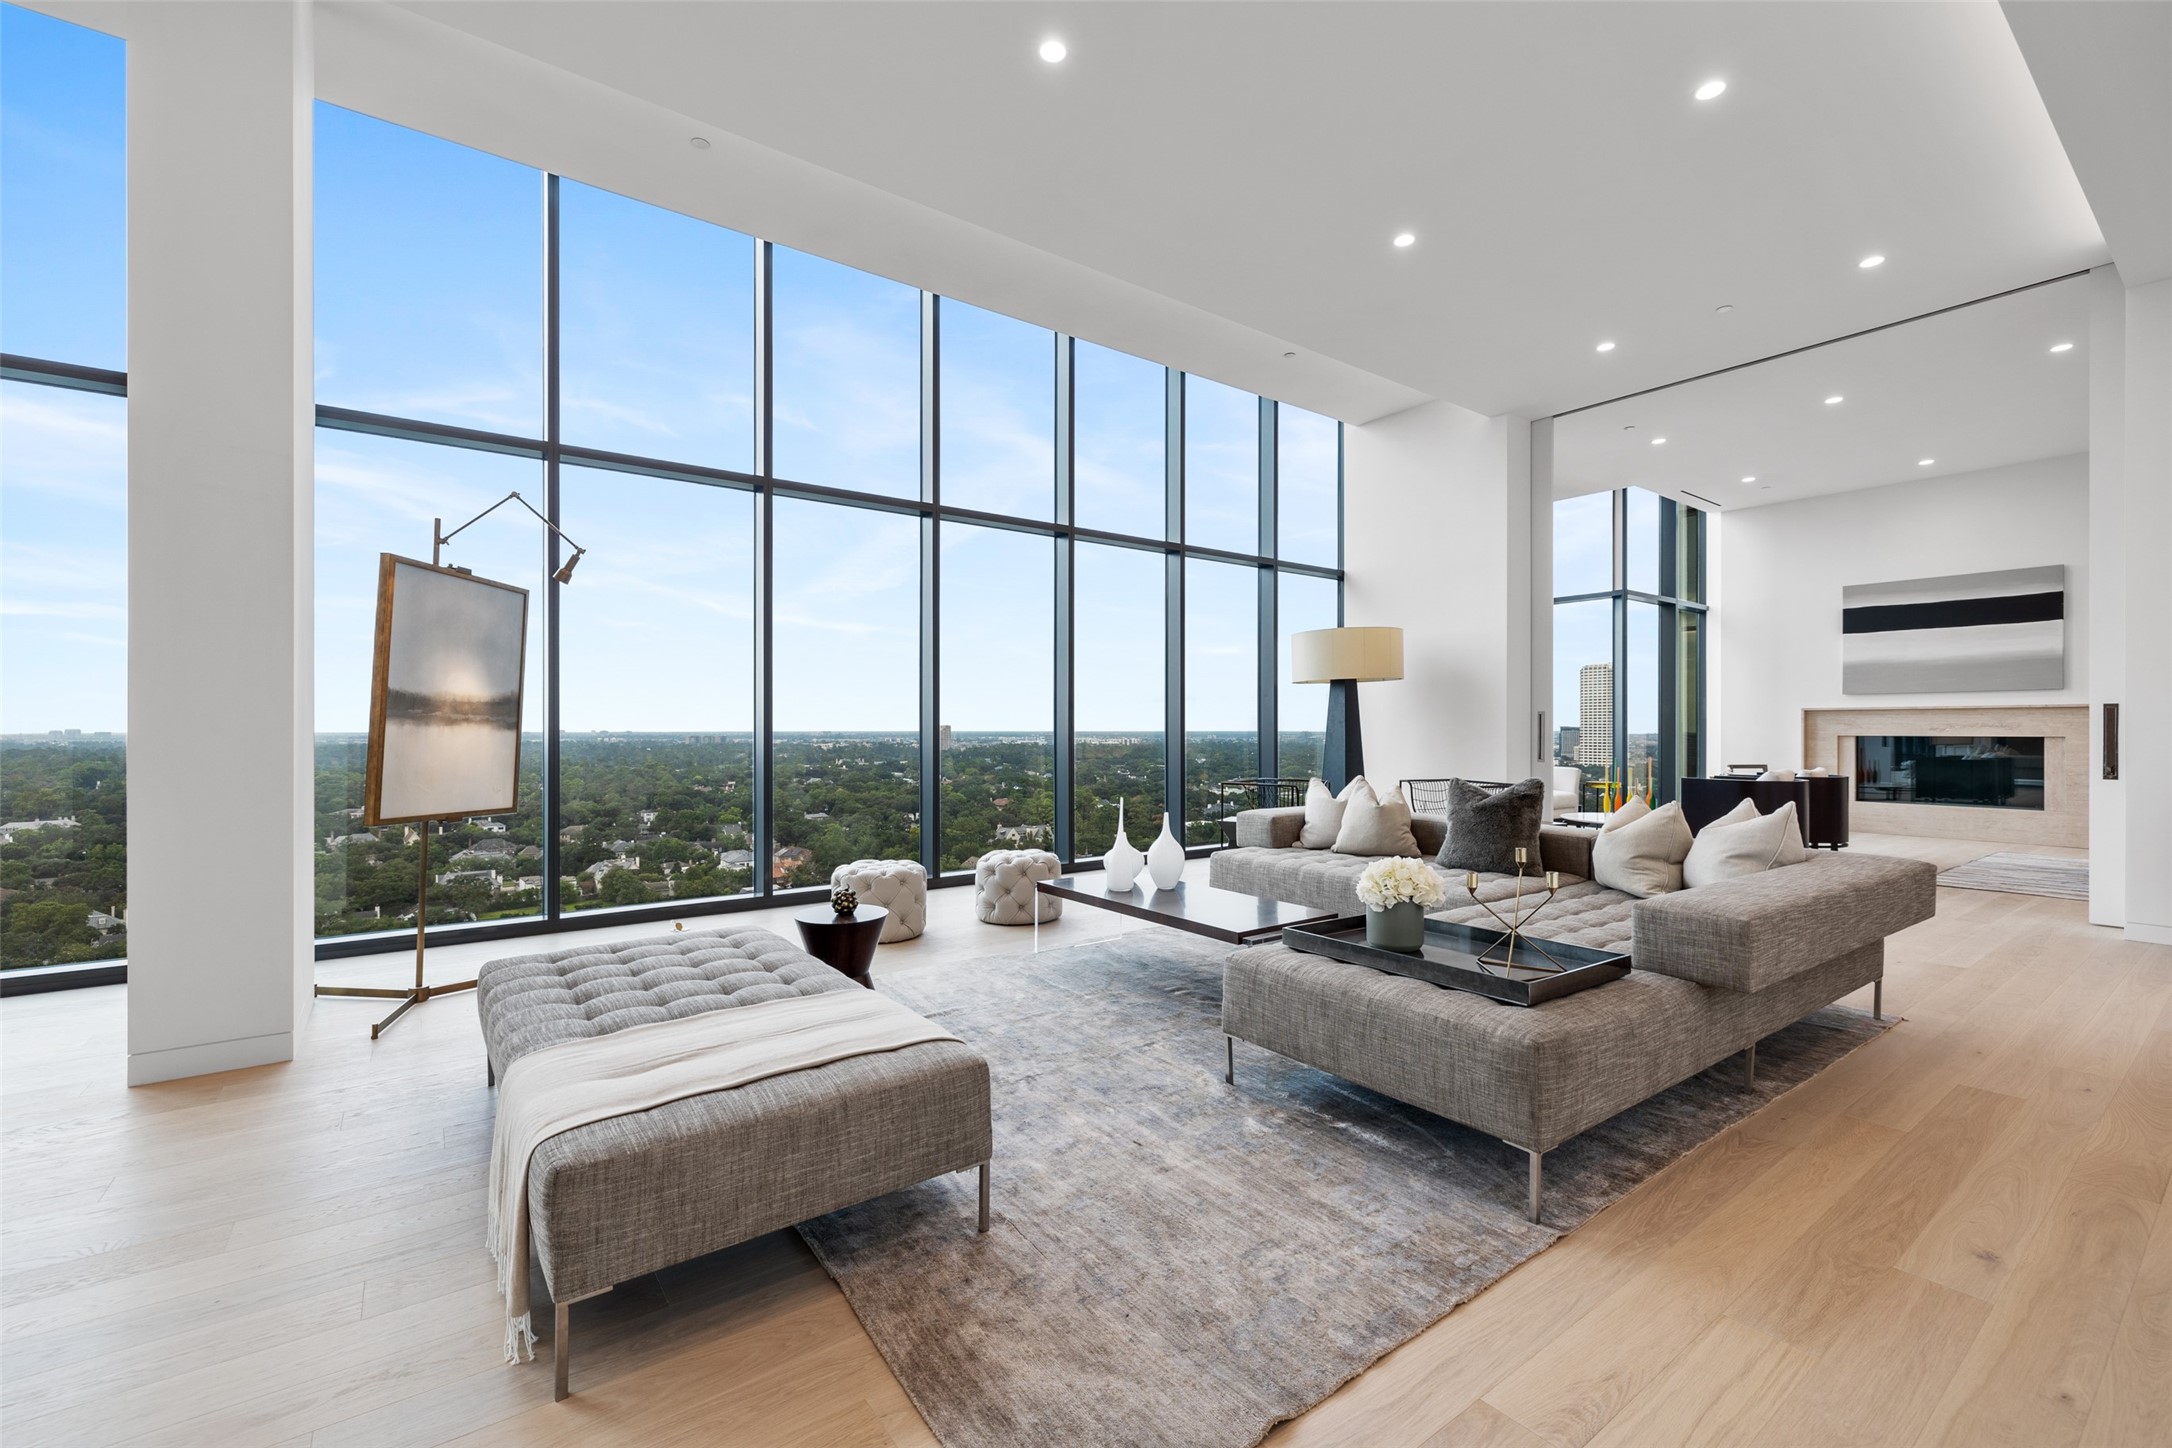 Whatever your style, this home will be a one of a kind living experience. Large, open living spaces featuring 14’ floor to ceiling windows and unobstructed views of the horizon over the gorgeous trees.